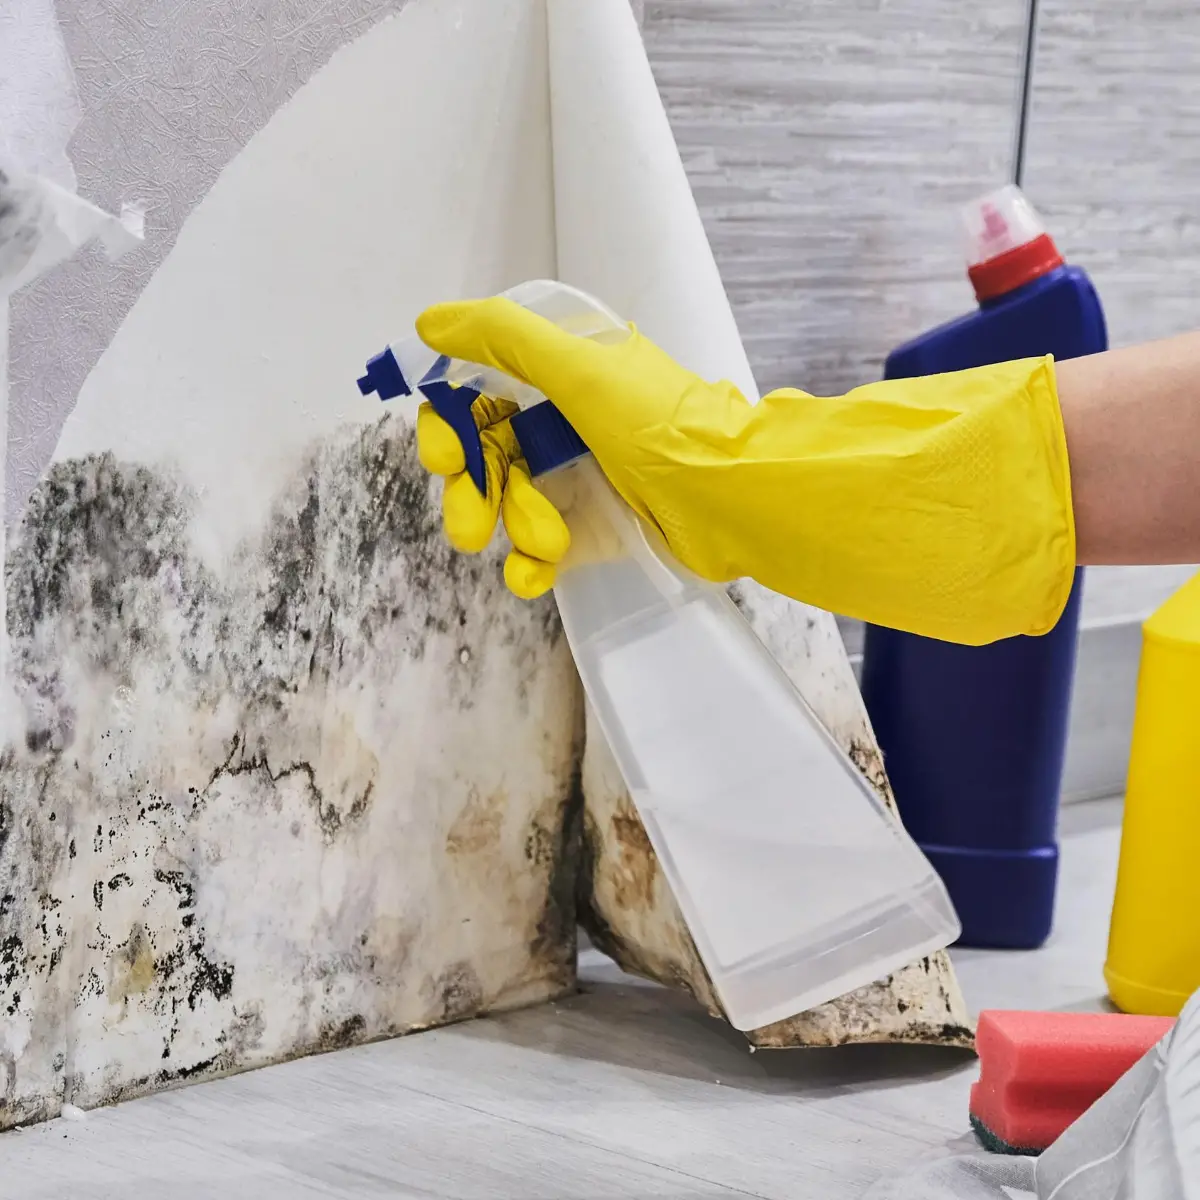 How to Remove Mold Safely